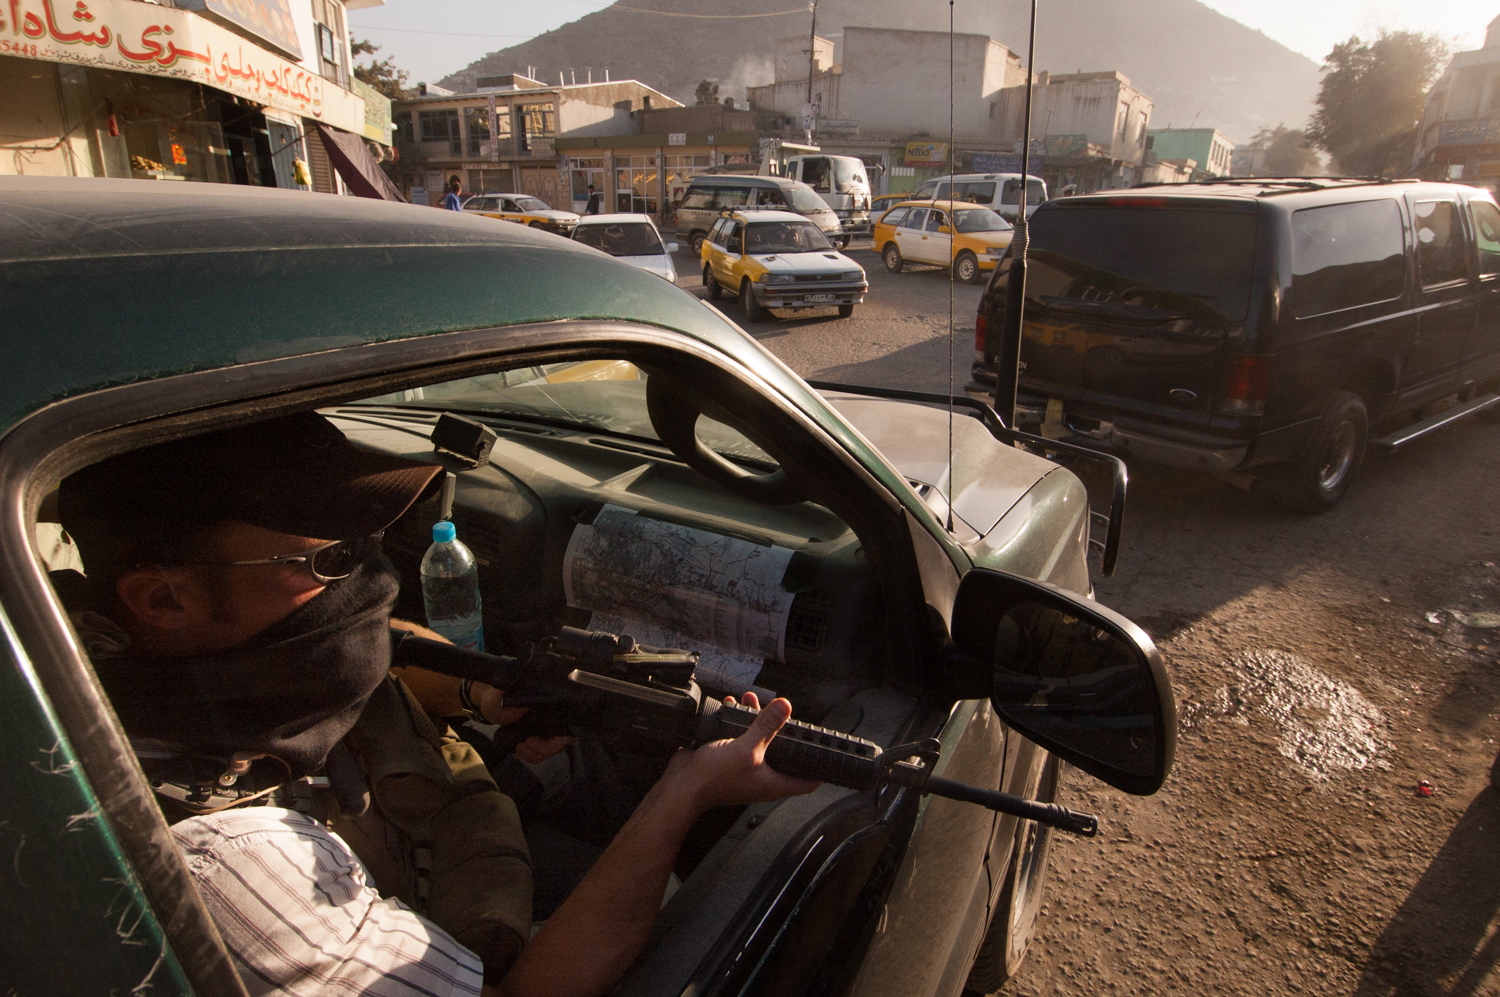  Private security contractor, Neil Gary, a former US Marine, rides in an SUV while providing security for a convoy in Kabul, Afghanistan. 